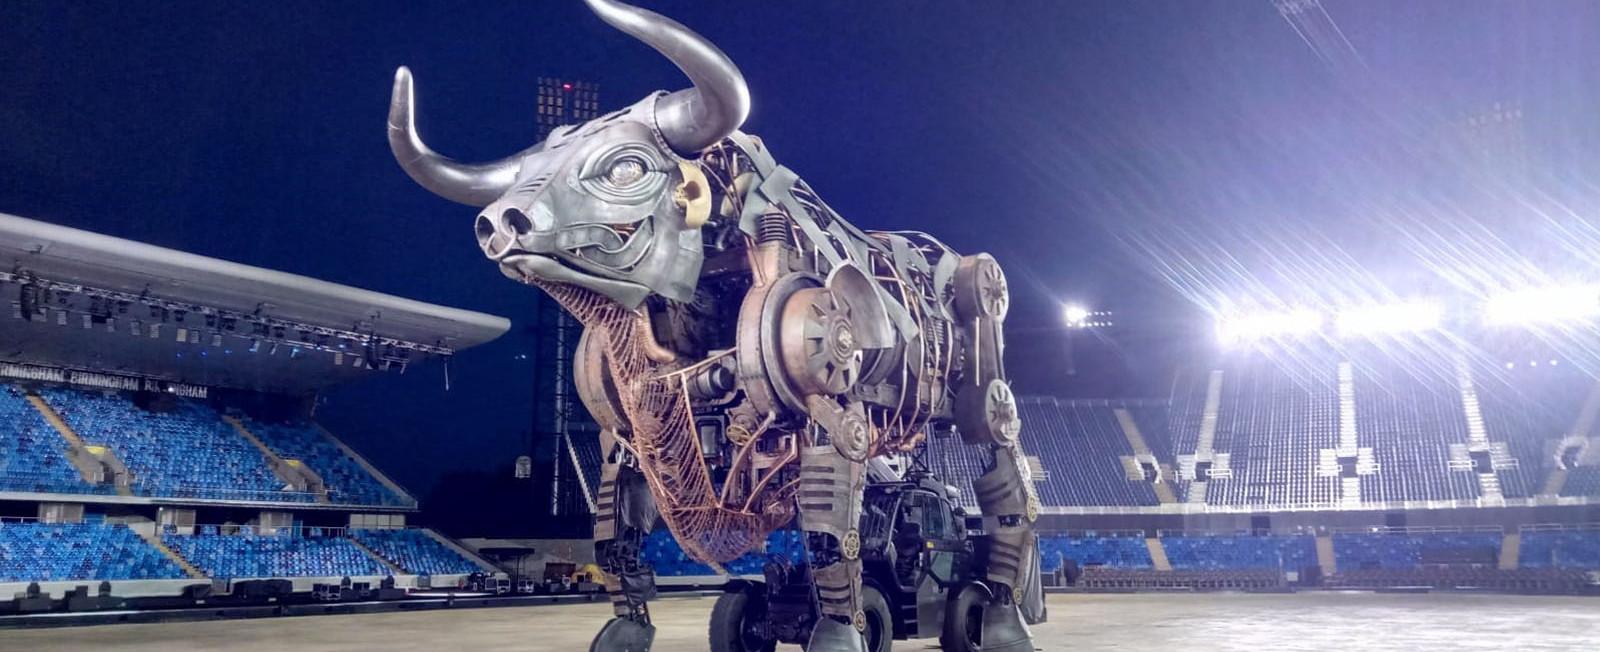 A large metal steampunk style mechanical bull in the middle of an empty stadium at light, lit up by the stadium lights